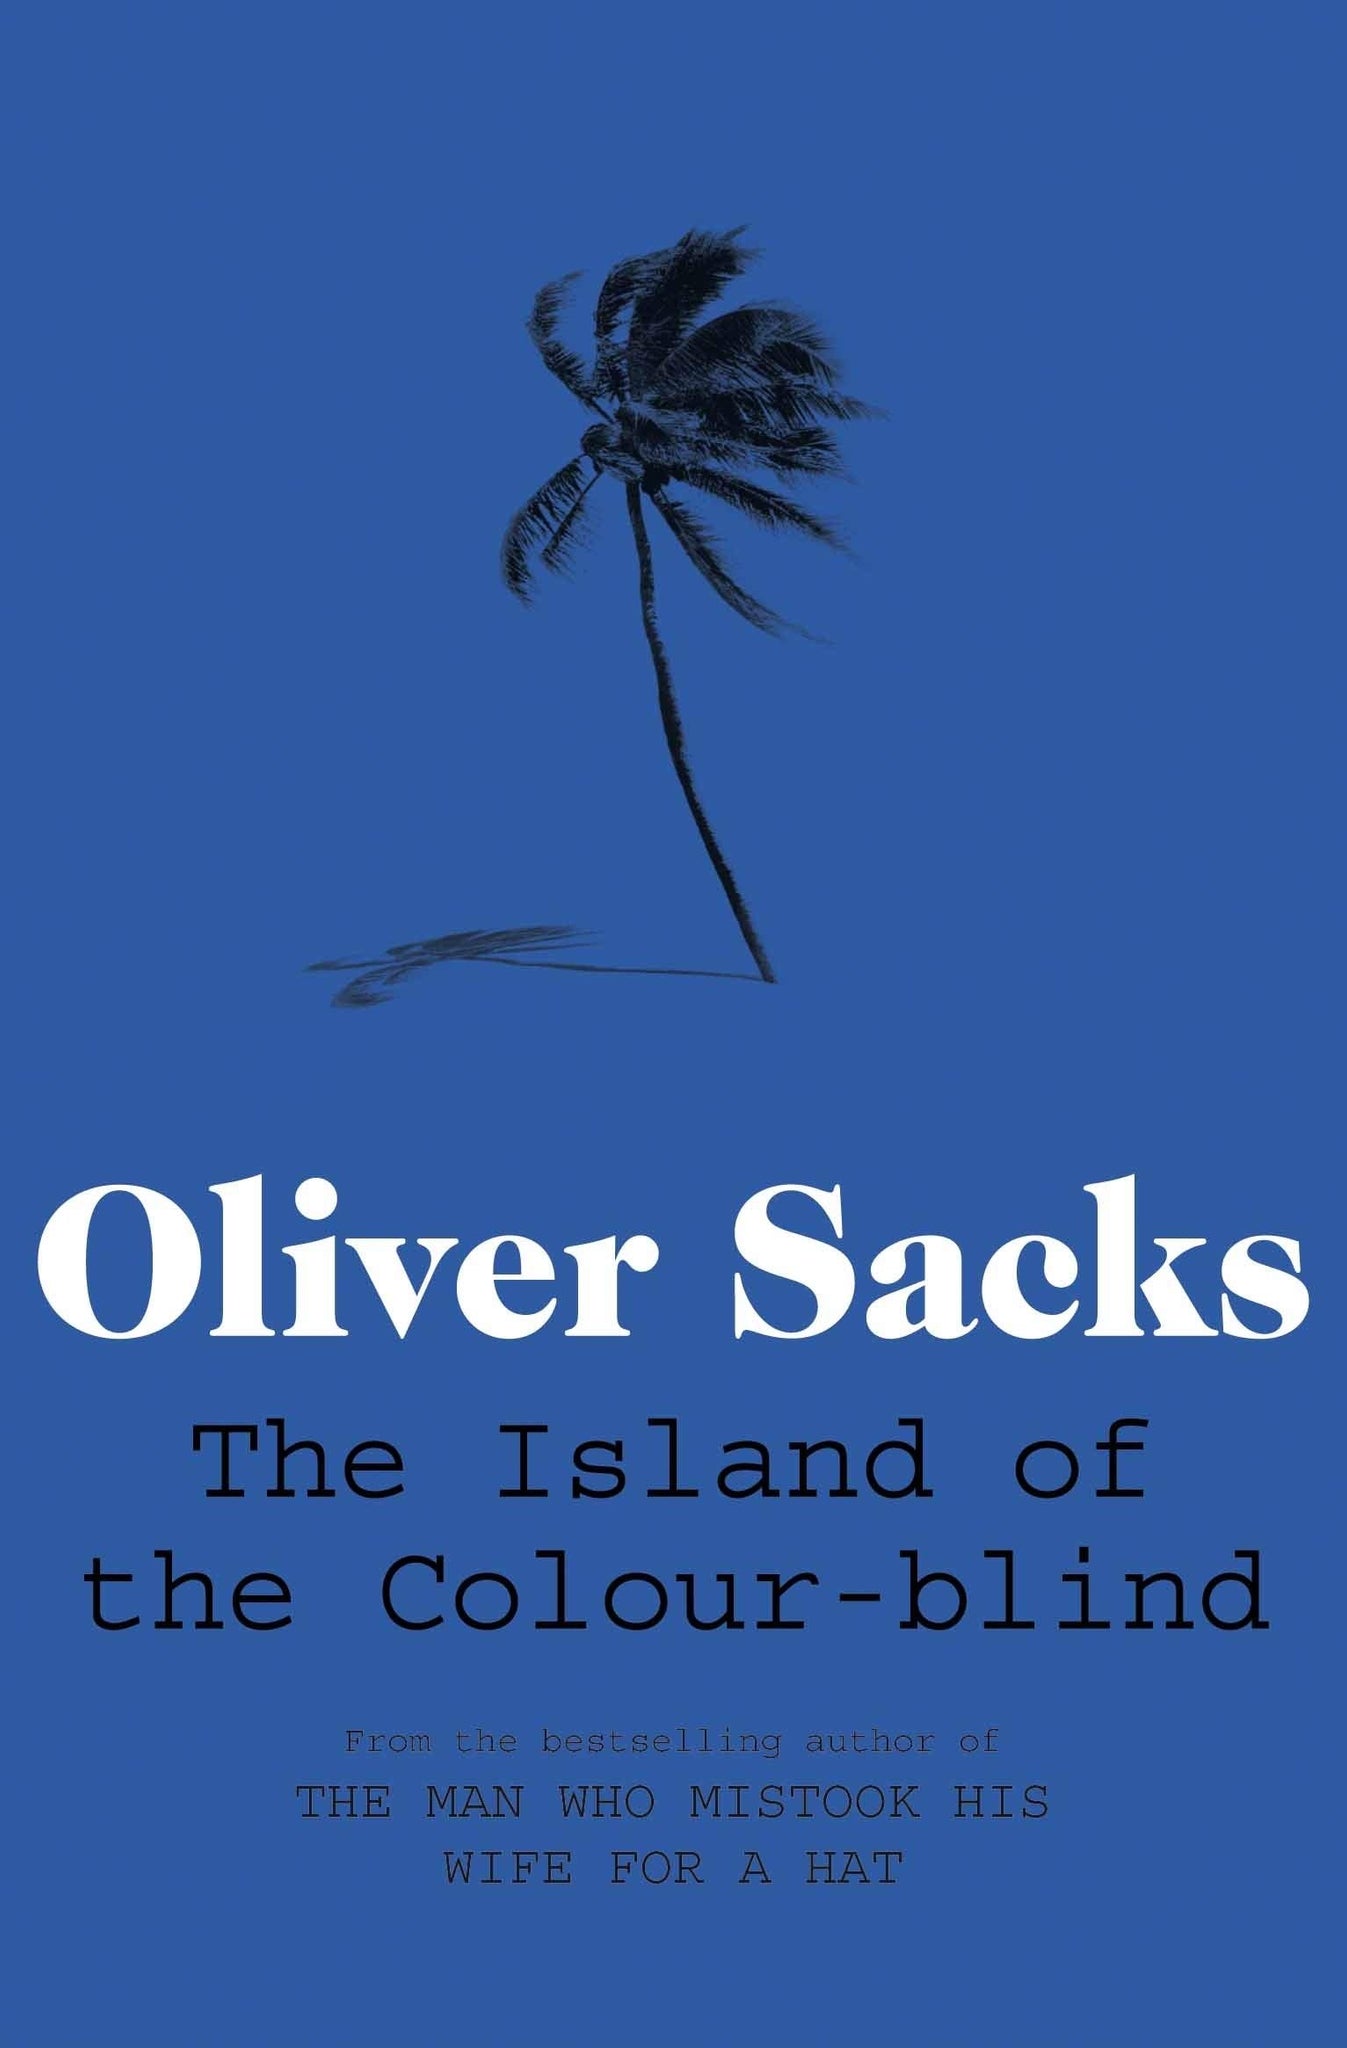 The Island Of The Colour-Blind And Cycad Island